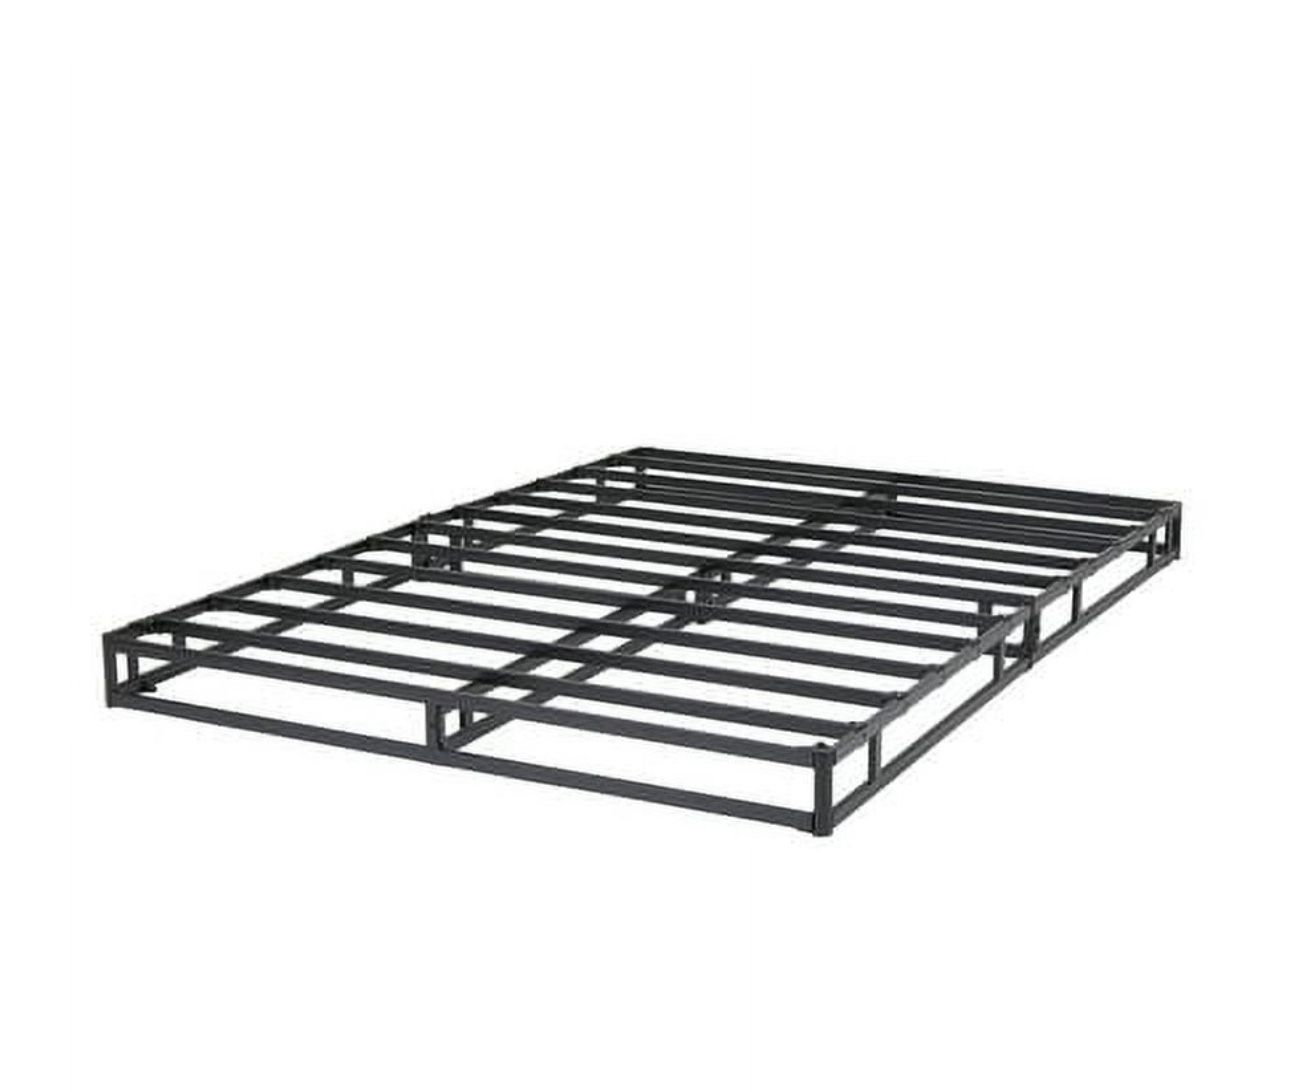 New 5" Full High Profile Easy Assembly Smart Metal Box Spring. Brand new in the box.